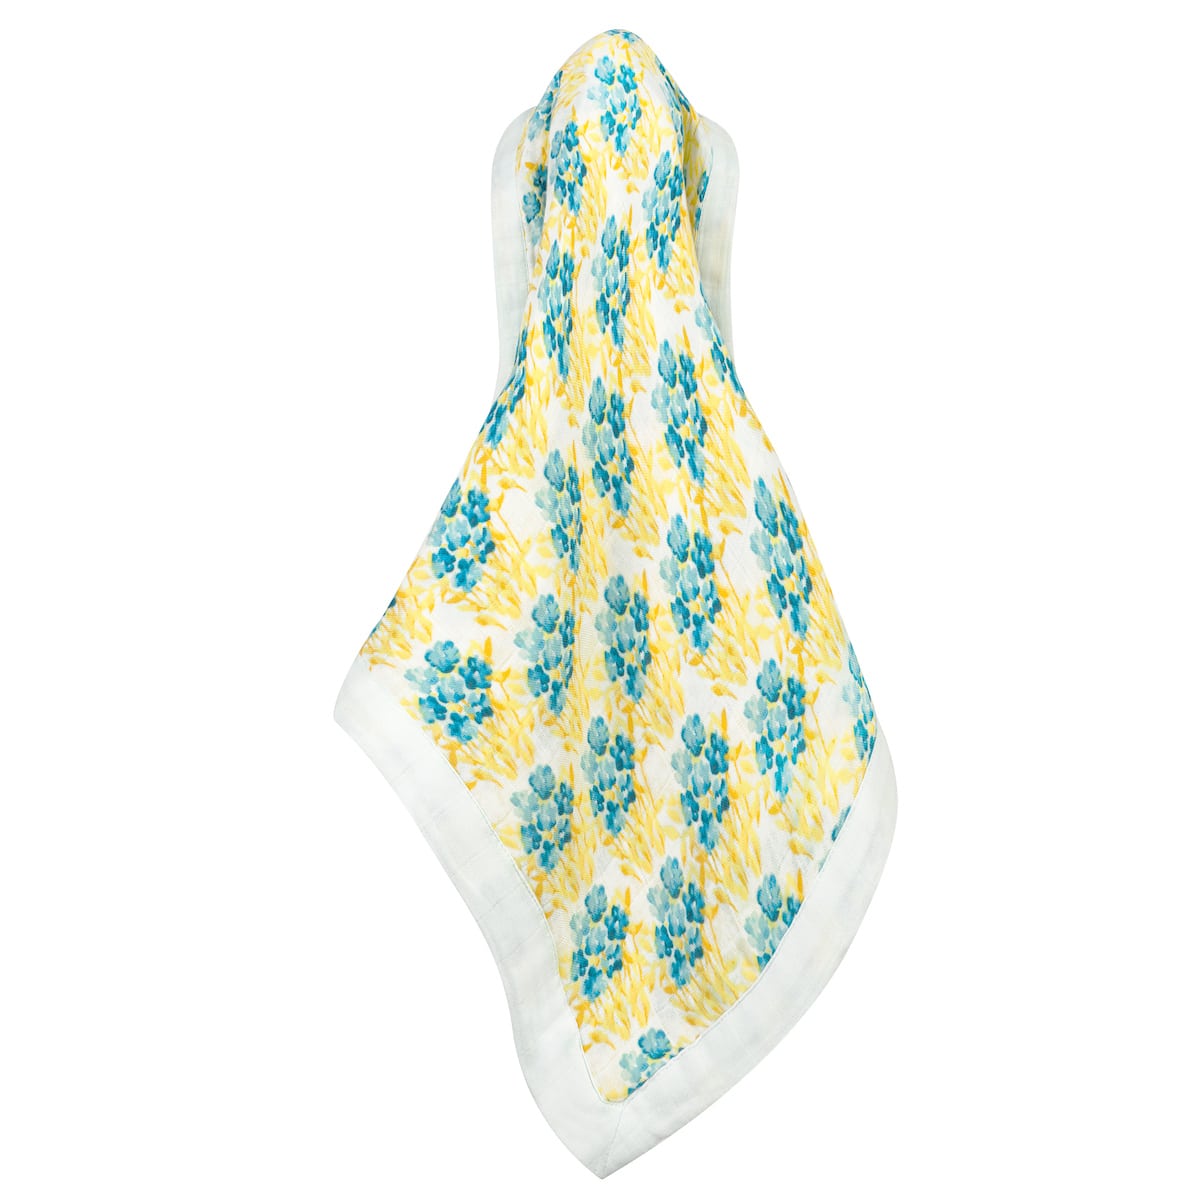 Sky Floral Mini Lovey Two-Layer Muslin Security Blanket